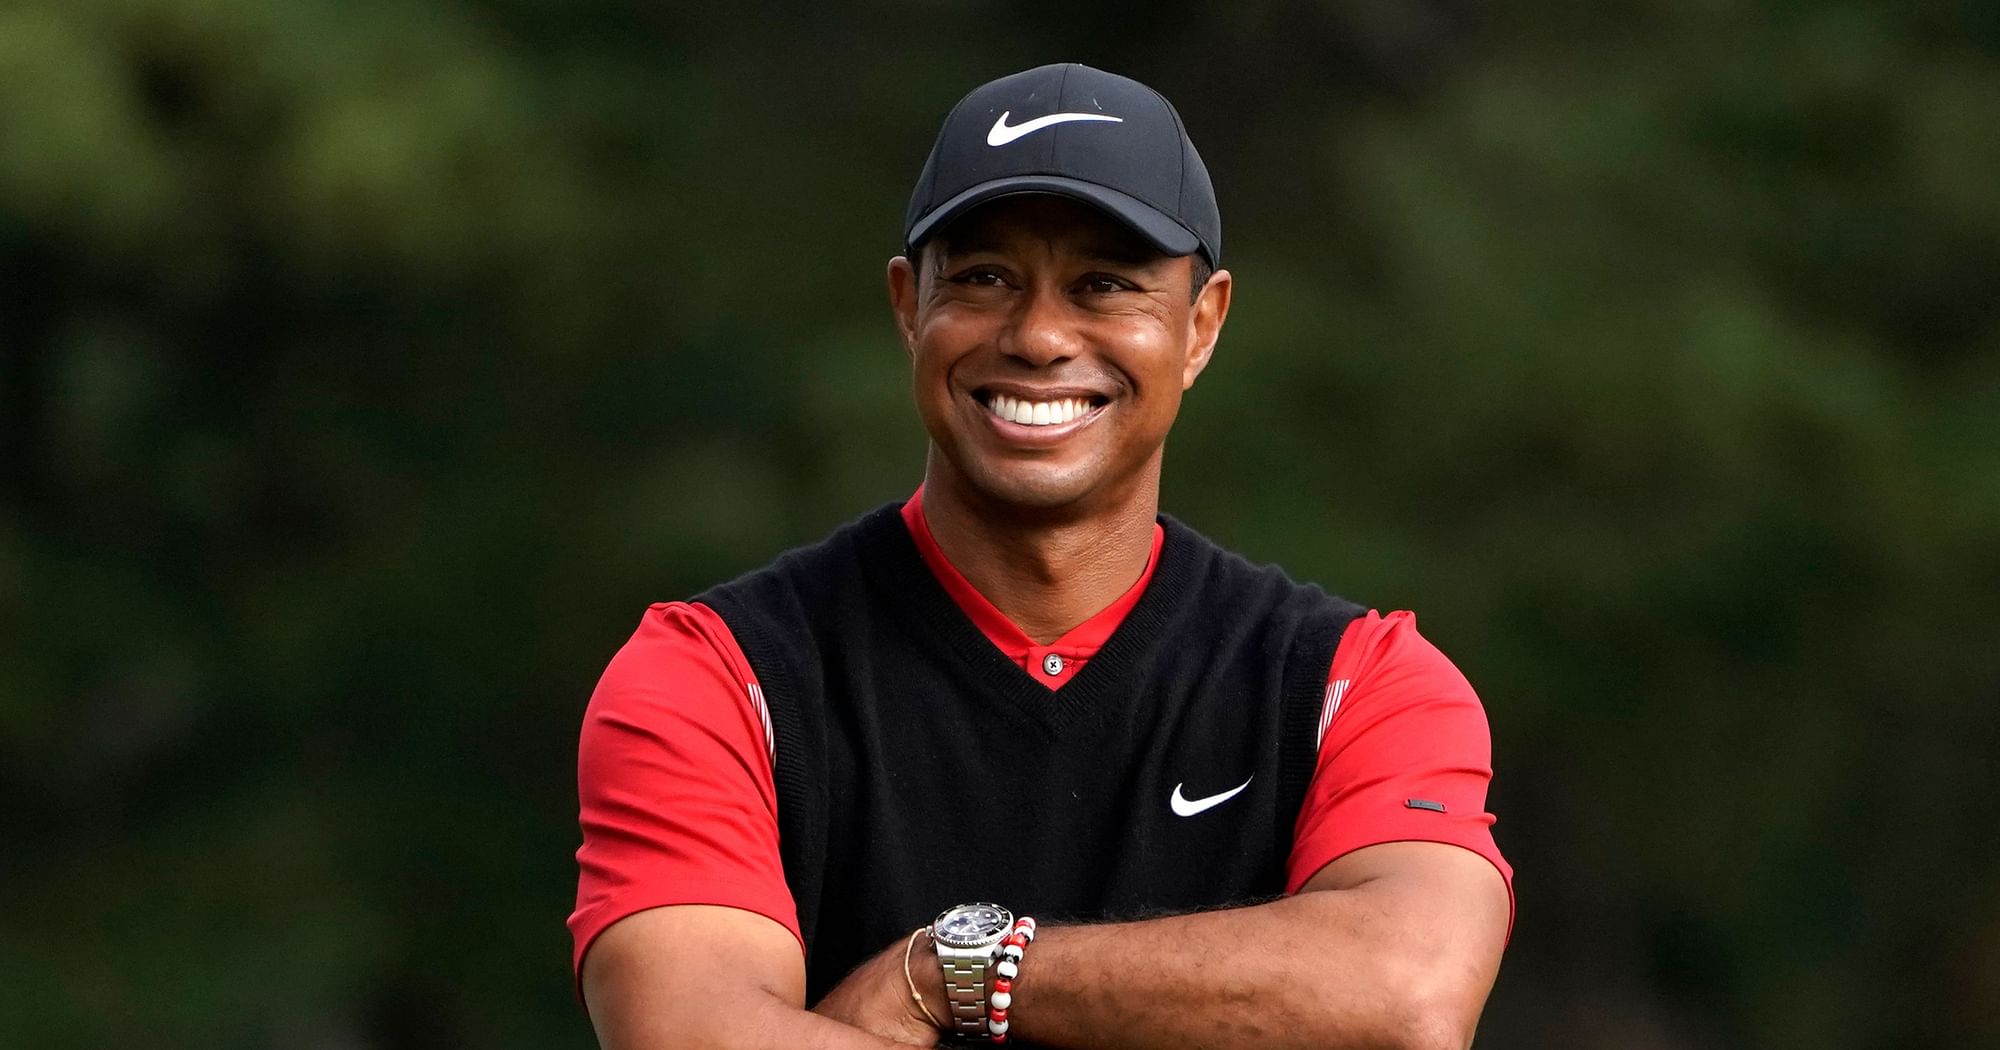 Woods Tied With Snead For Most PGA Wins, And No One Even is Close